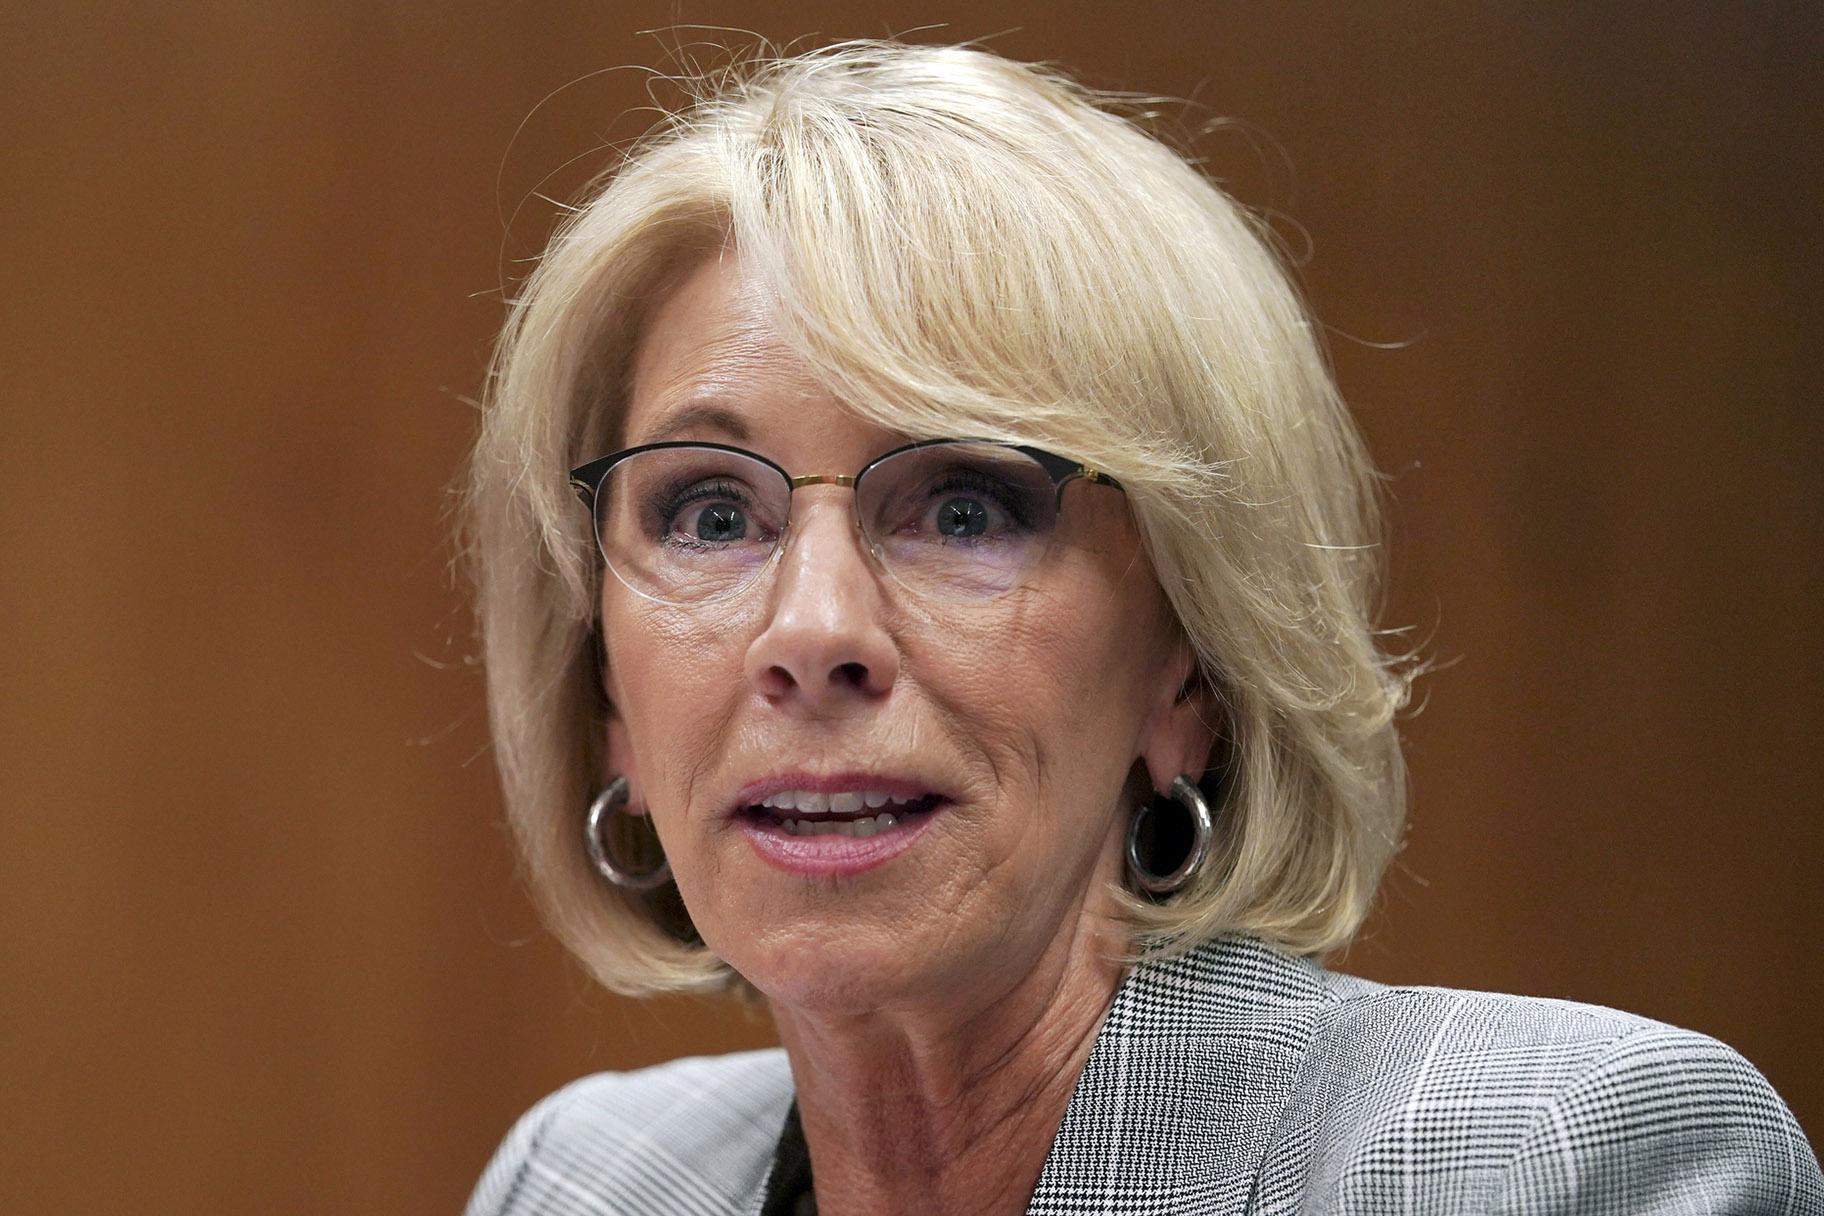 In this June 5, 2018, file photo, Education Secretary Betsy DeVos testifies during a Senate Subcommittee on Labor, Health and Human Services, Education, and Related Agencies Appropriations in Washington. (AP Photo / Carolyn Kaster, File)